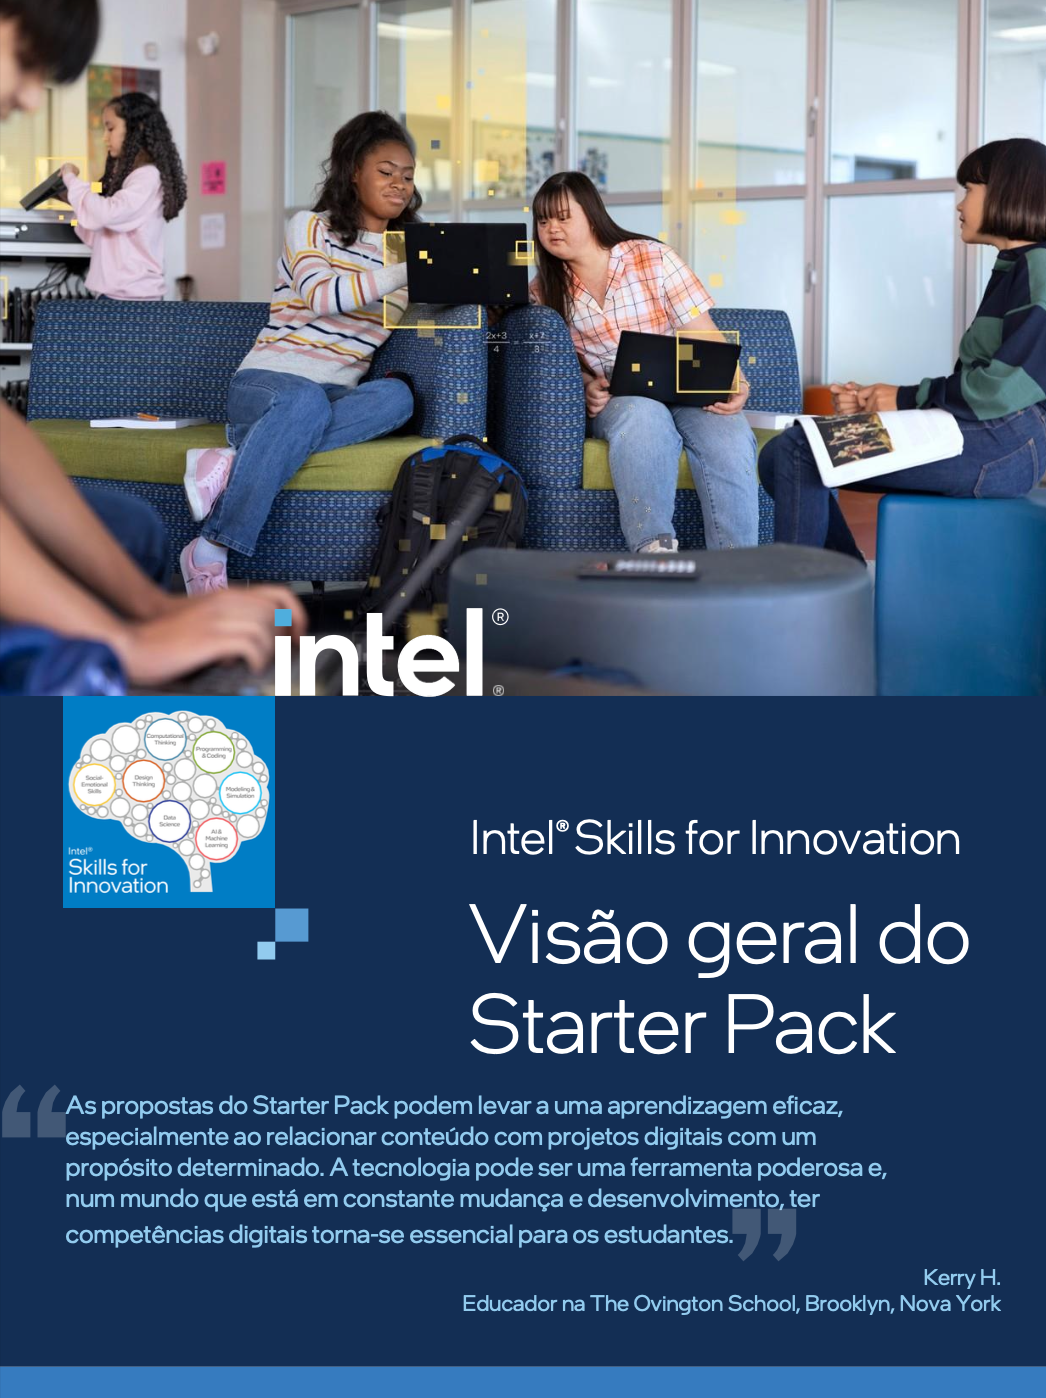 Intel SFI - SP Overview - 20210415_0844_CT